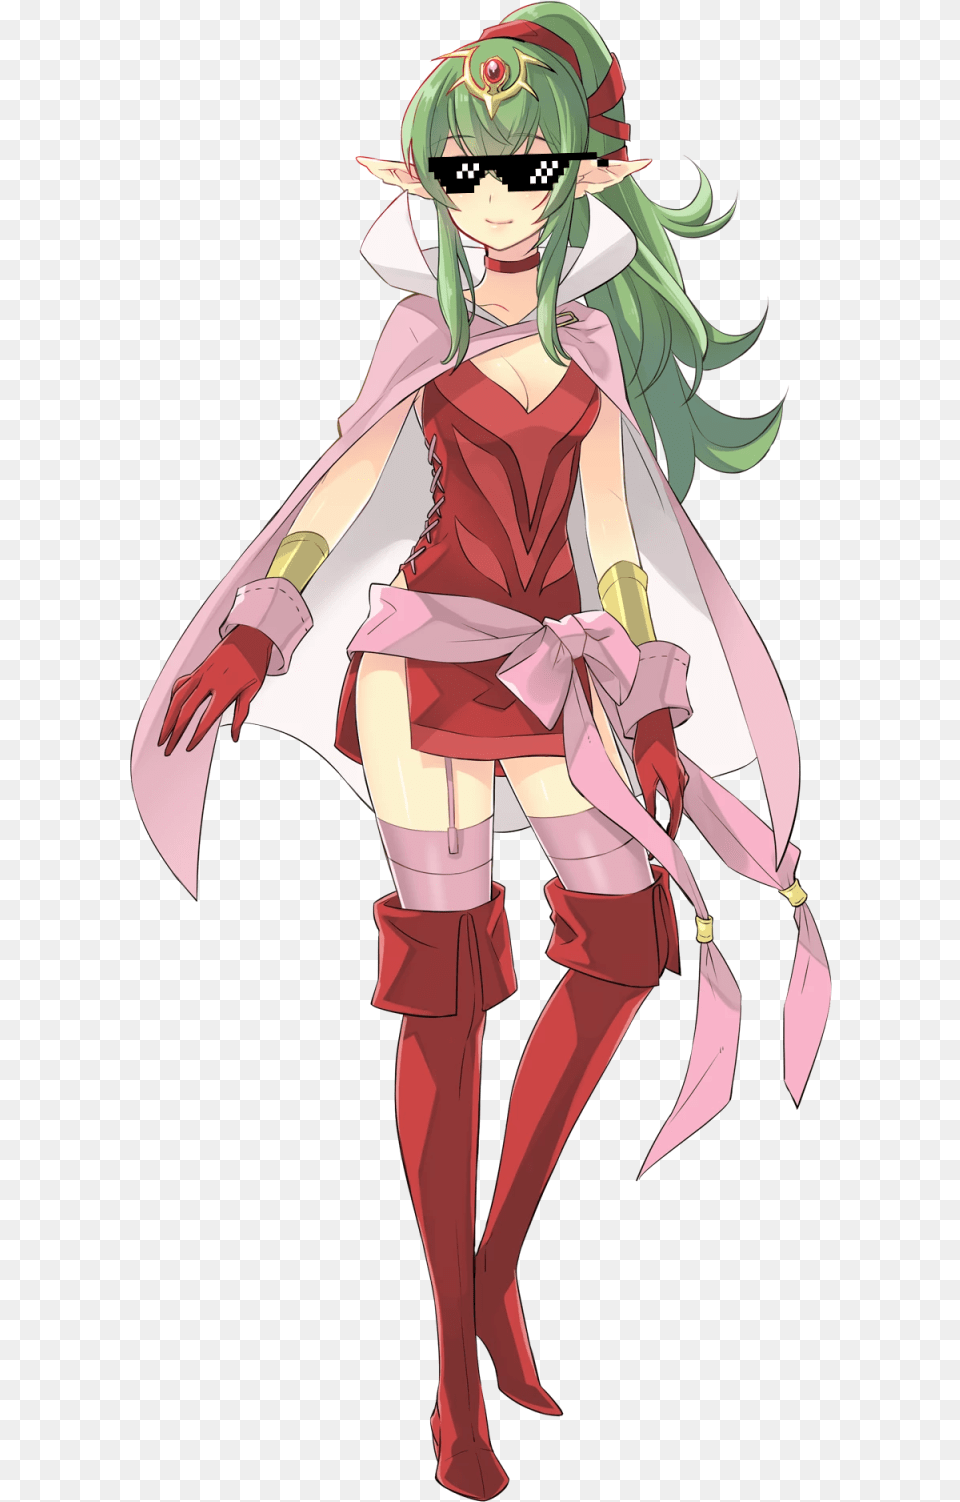 Adult Tiki But She Has The Mlg Sunglasses Tiki From Fire Emblem, Publication, Book, Comics, Elf Png